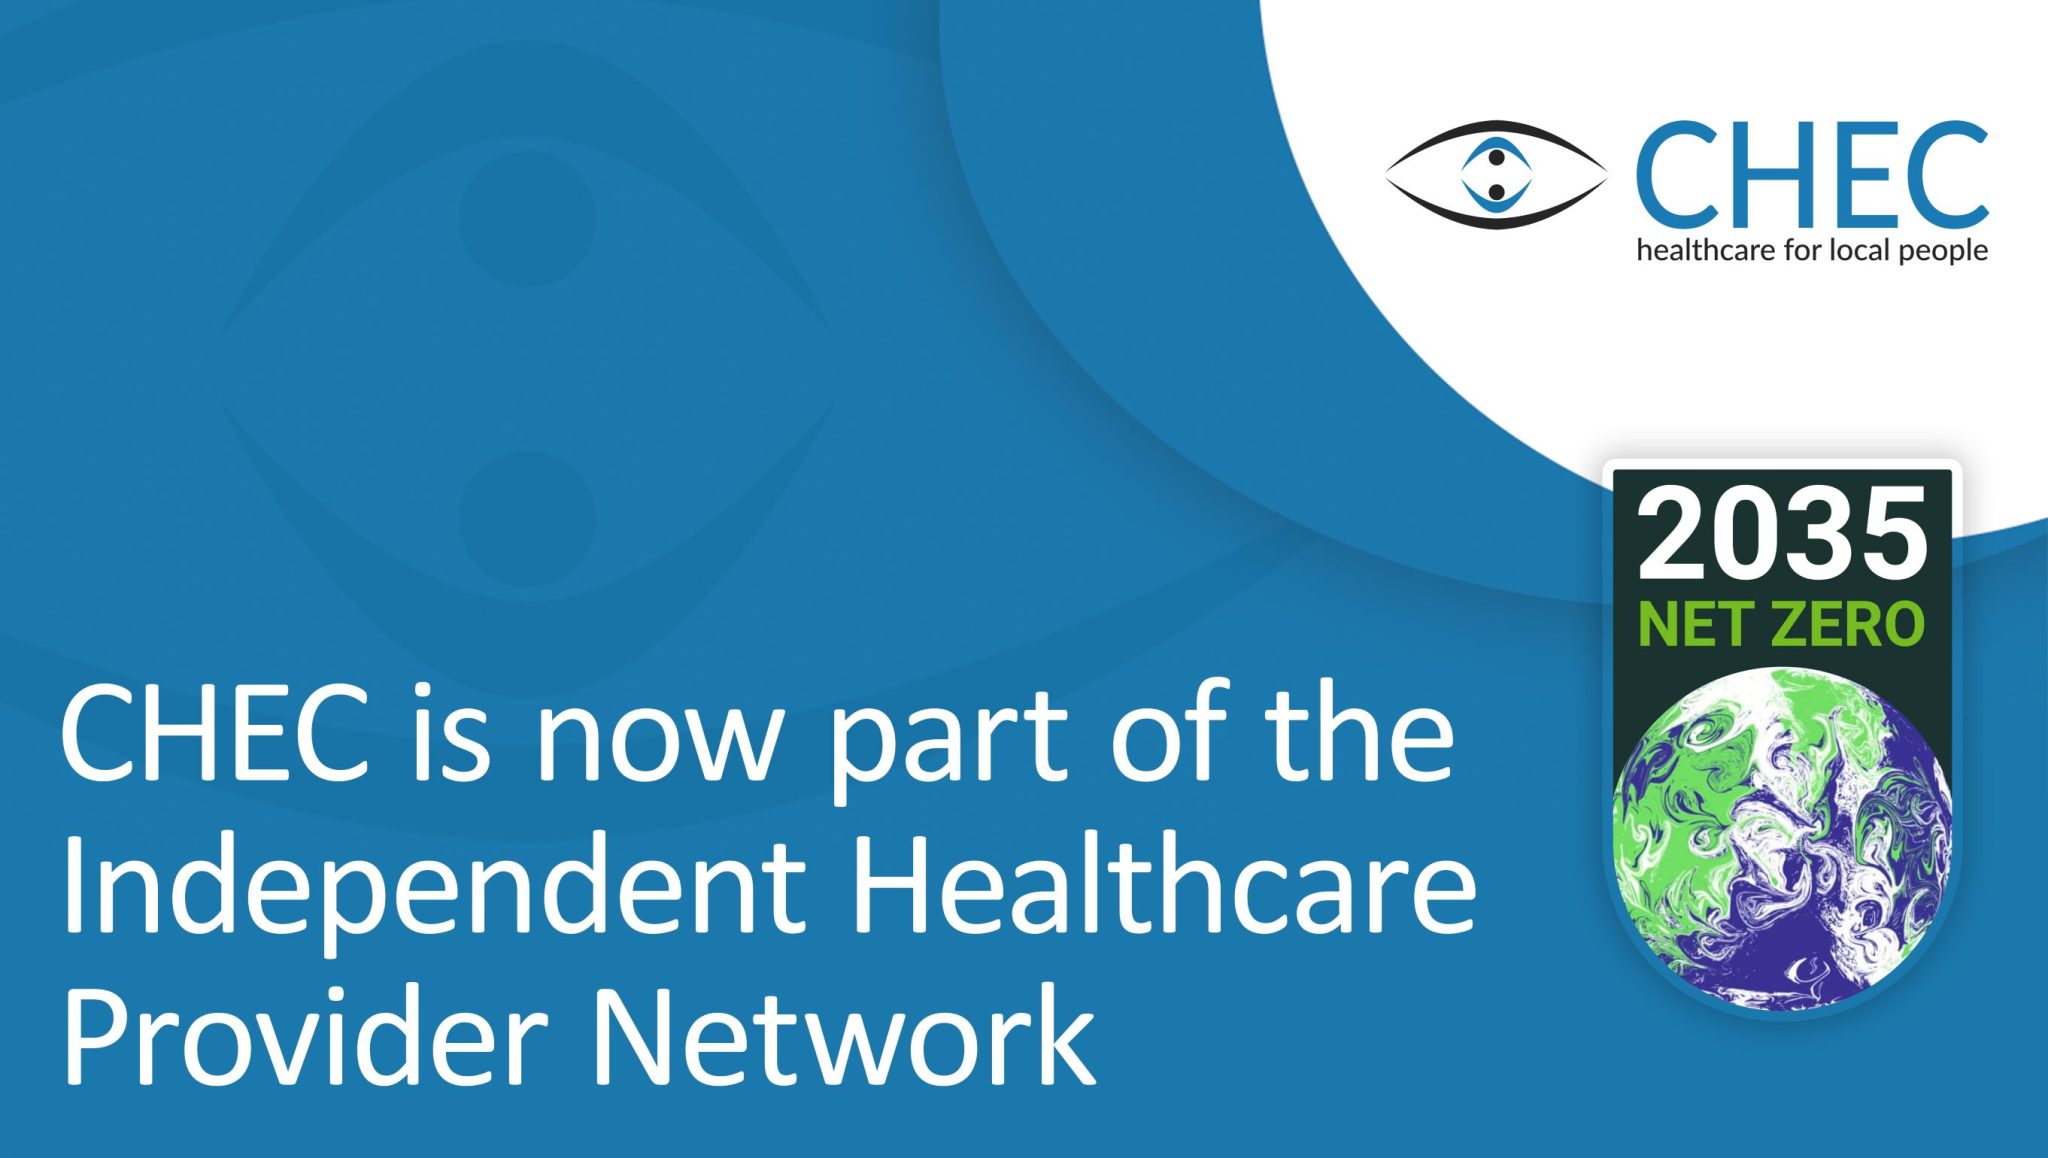 chec is now part of the independent healthcare provider network